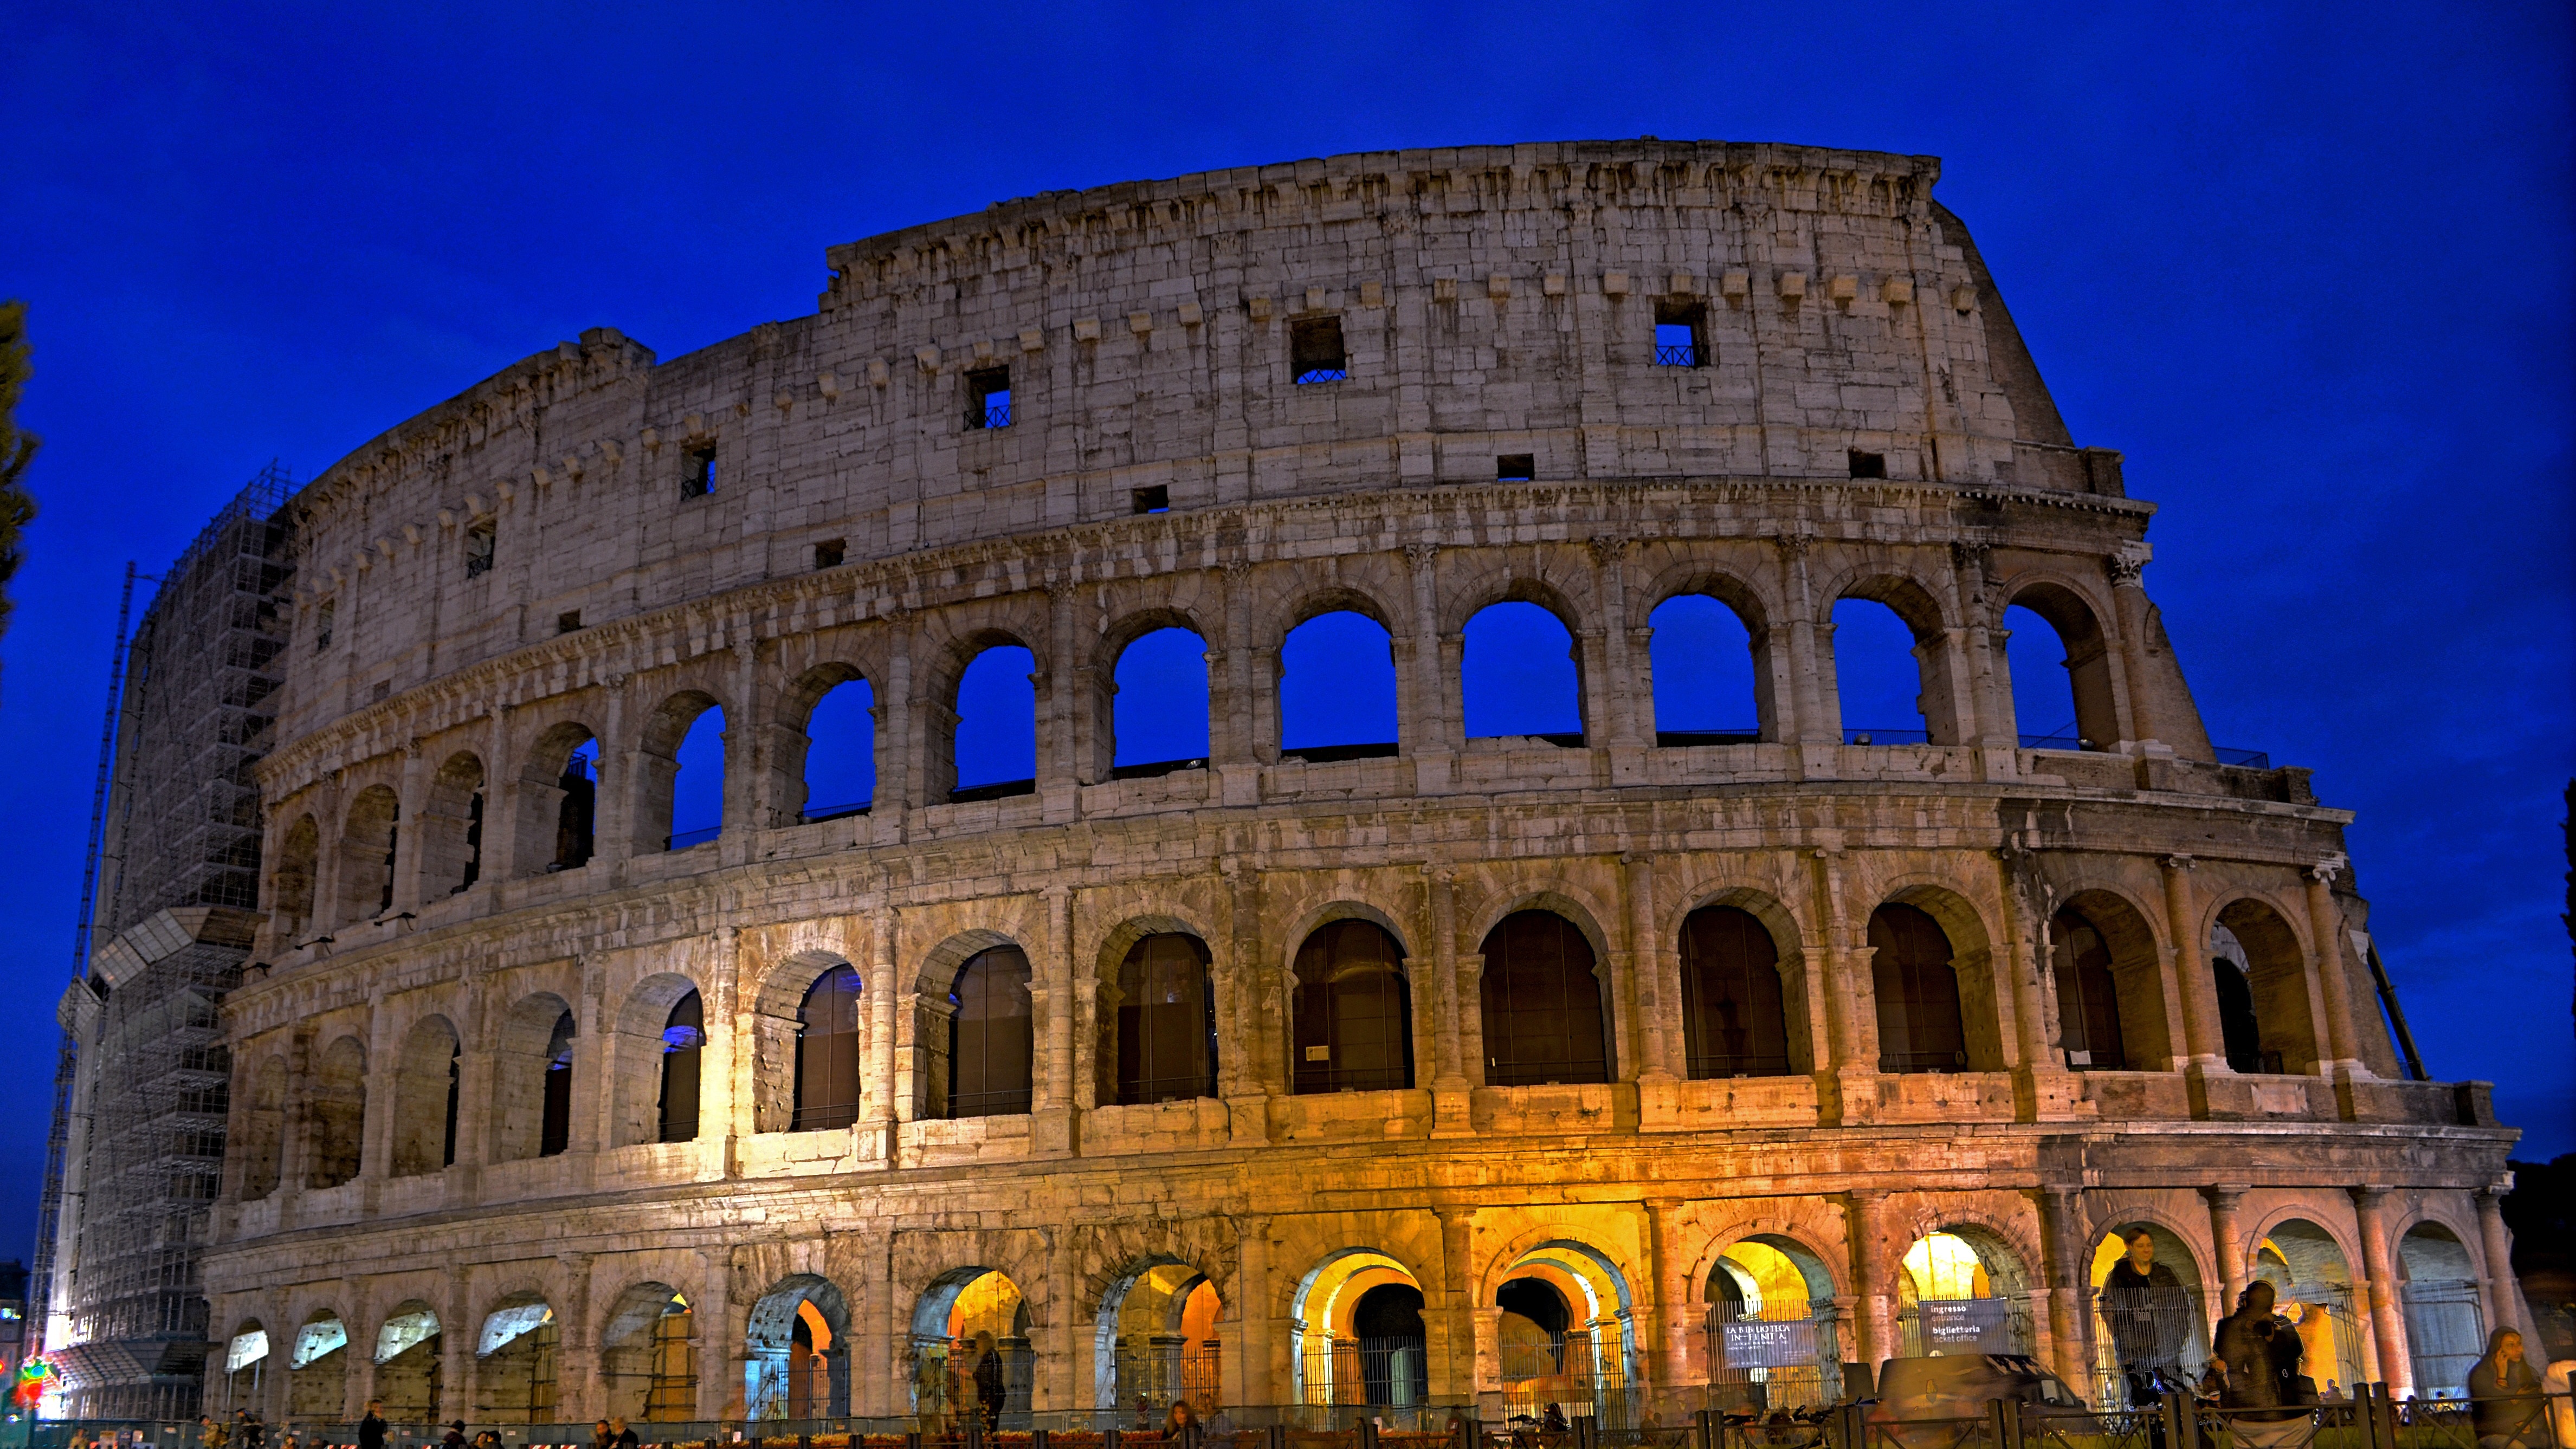 Wallpapers night Rome ancient history on the desktop